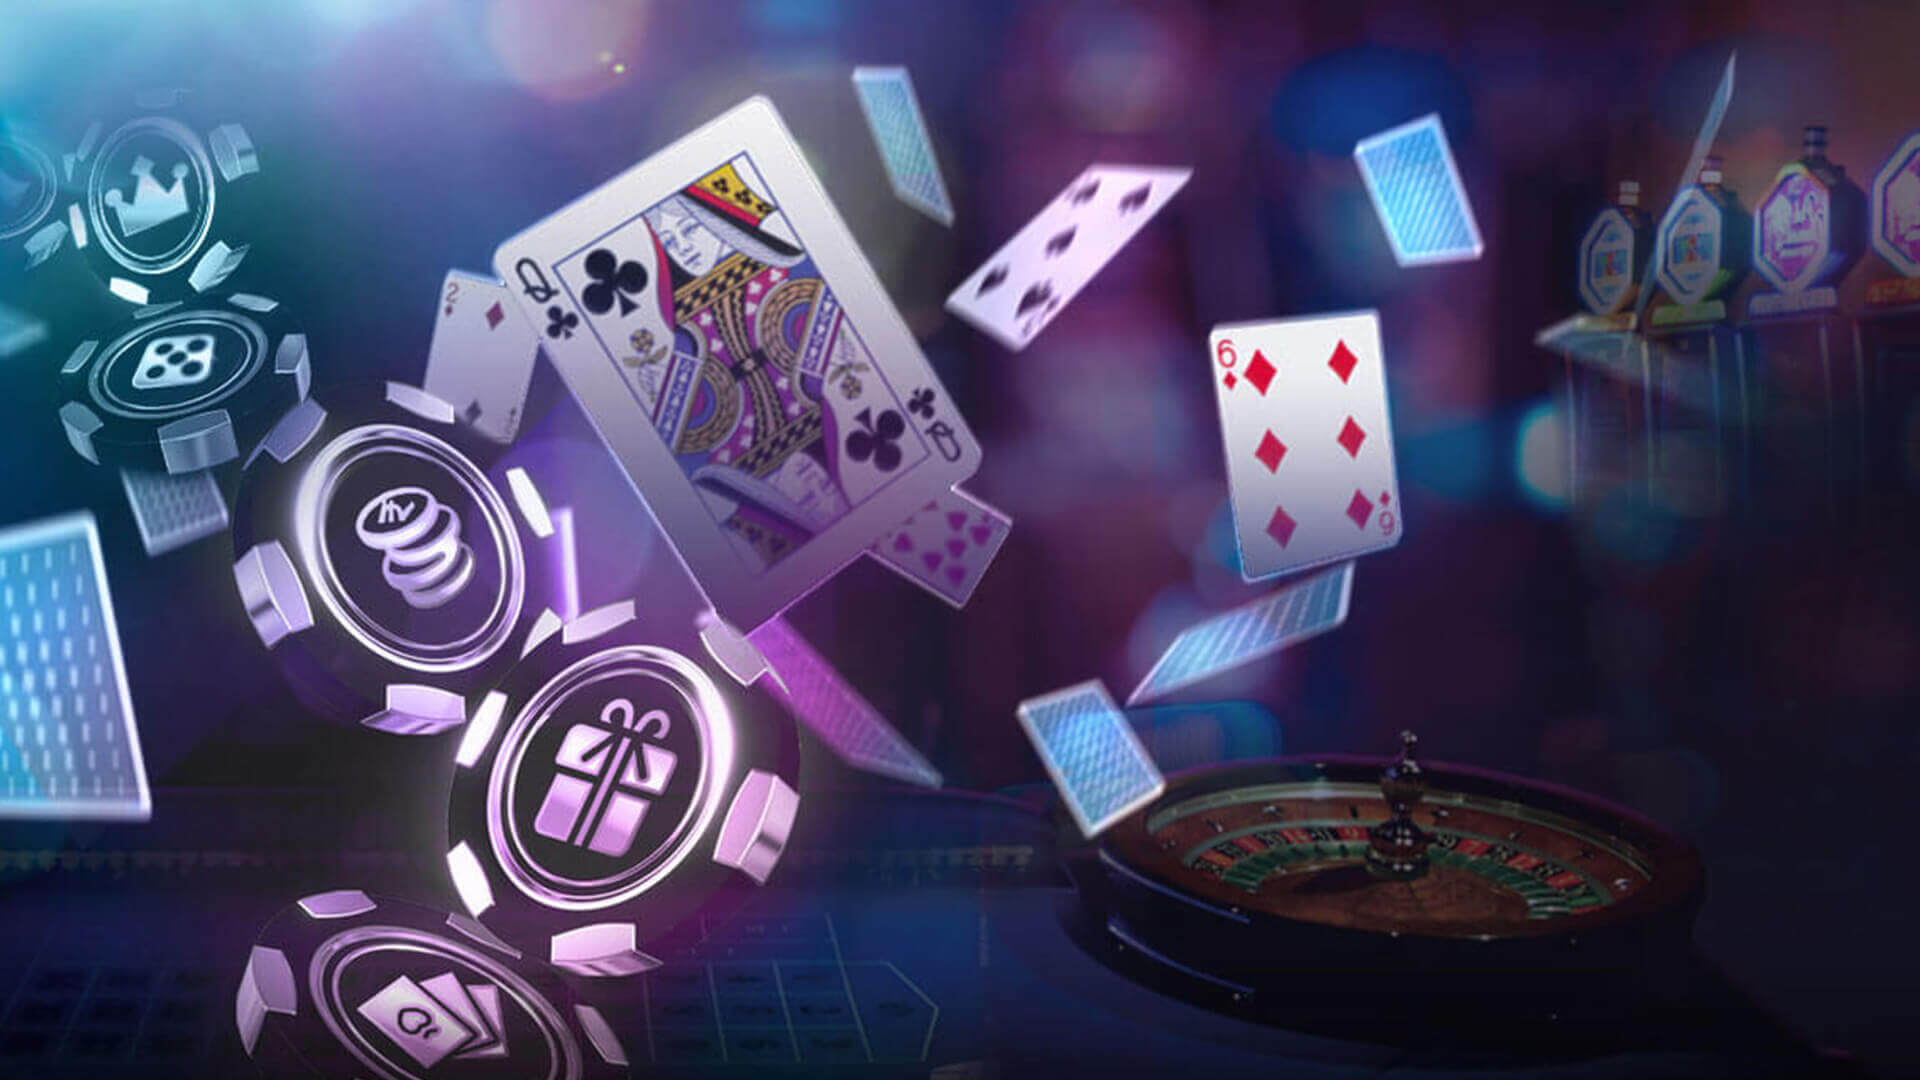 The Best Slots Apps for Mobile Gaming on the Go